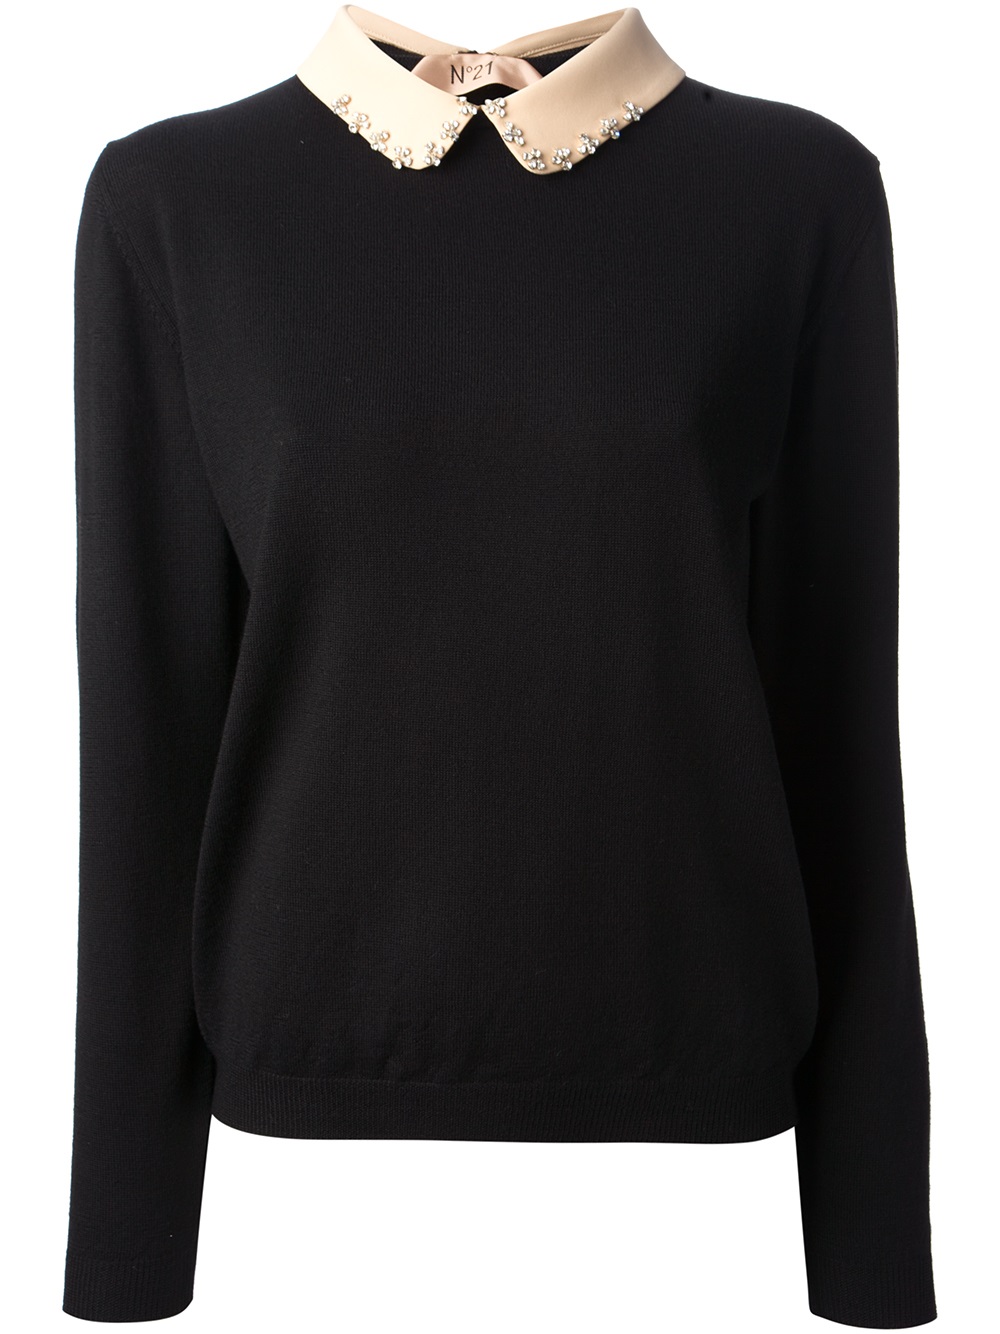 Lyst - N°21 Embellished Collar Sweater in Black